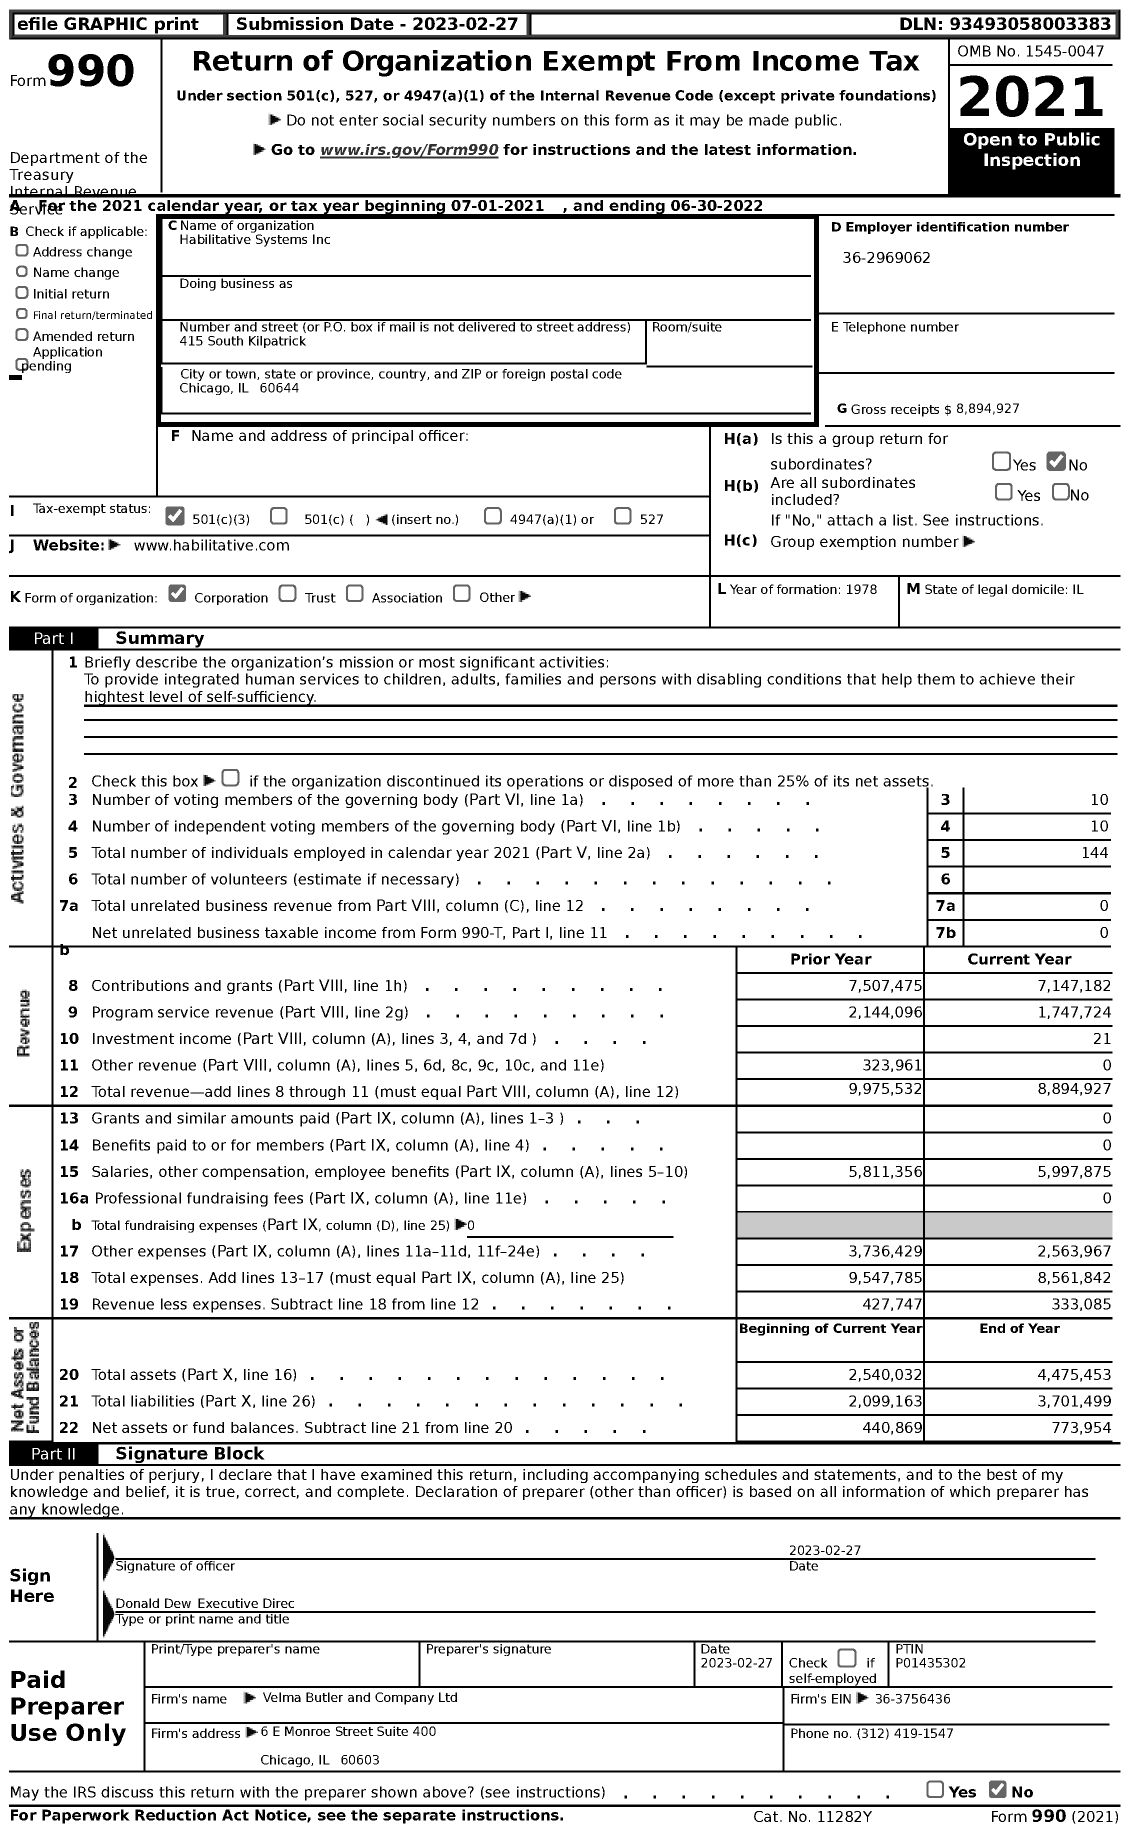 Image of first page of 2021 Form 990 for Habilitative Systems (HSI)